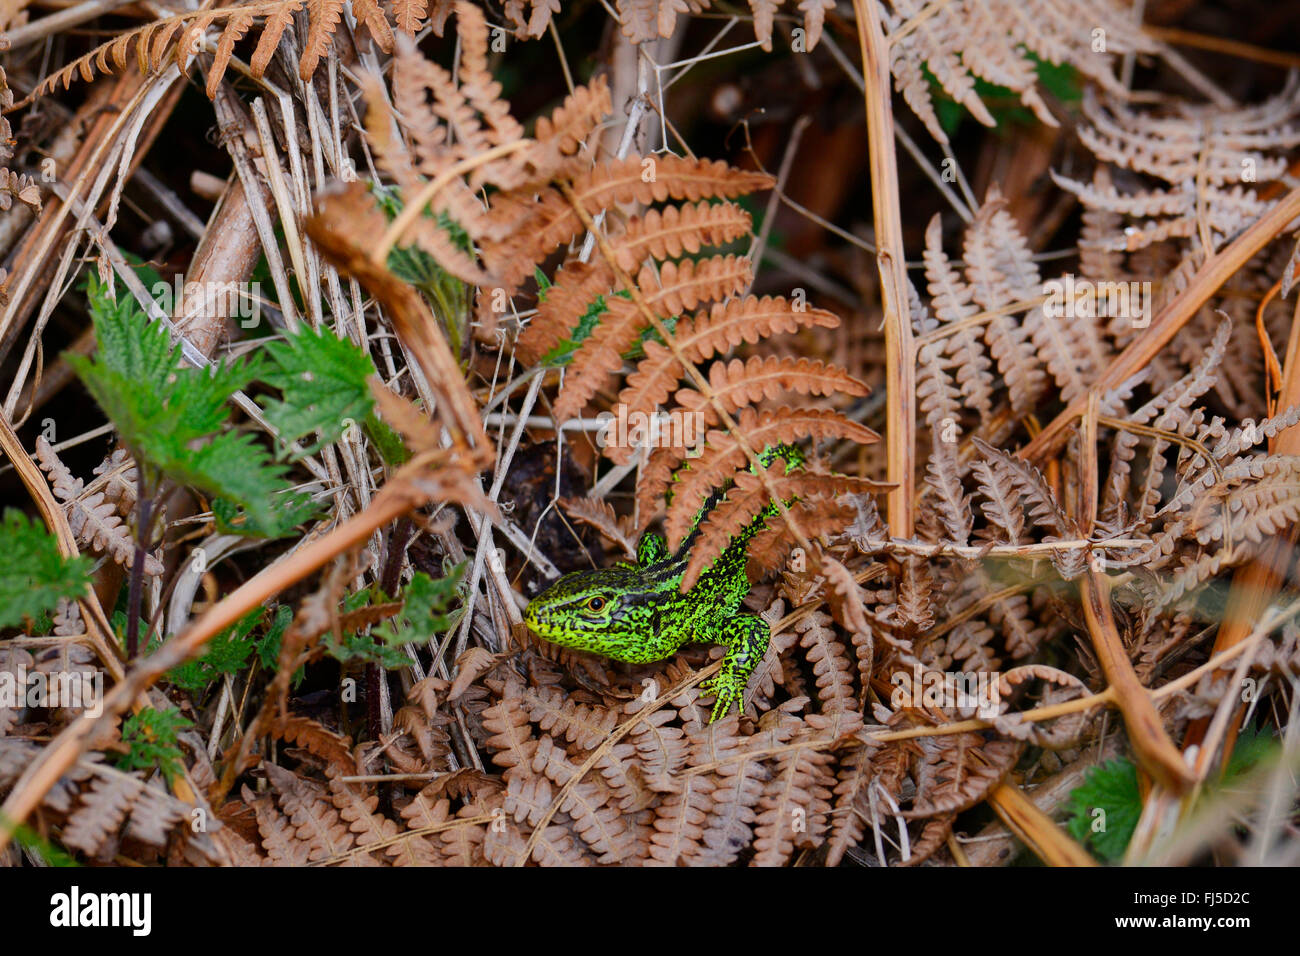 sand lizard (Lacerta agilis), comes out of its hide, Germany, Allgaeu Stock Photo